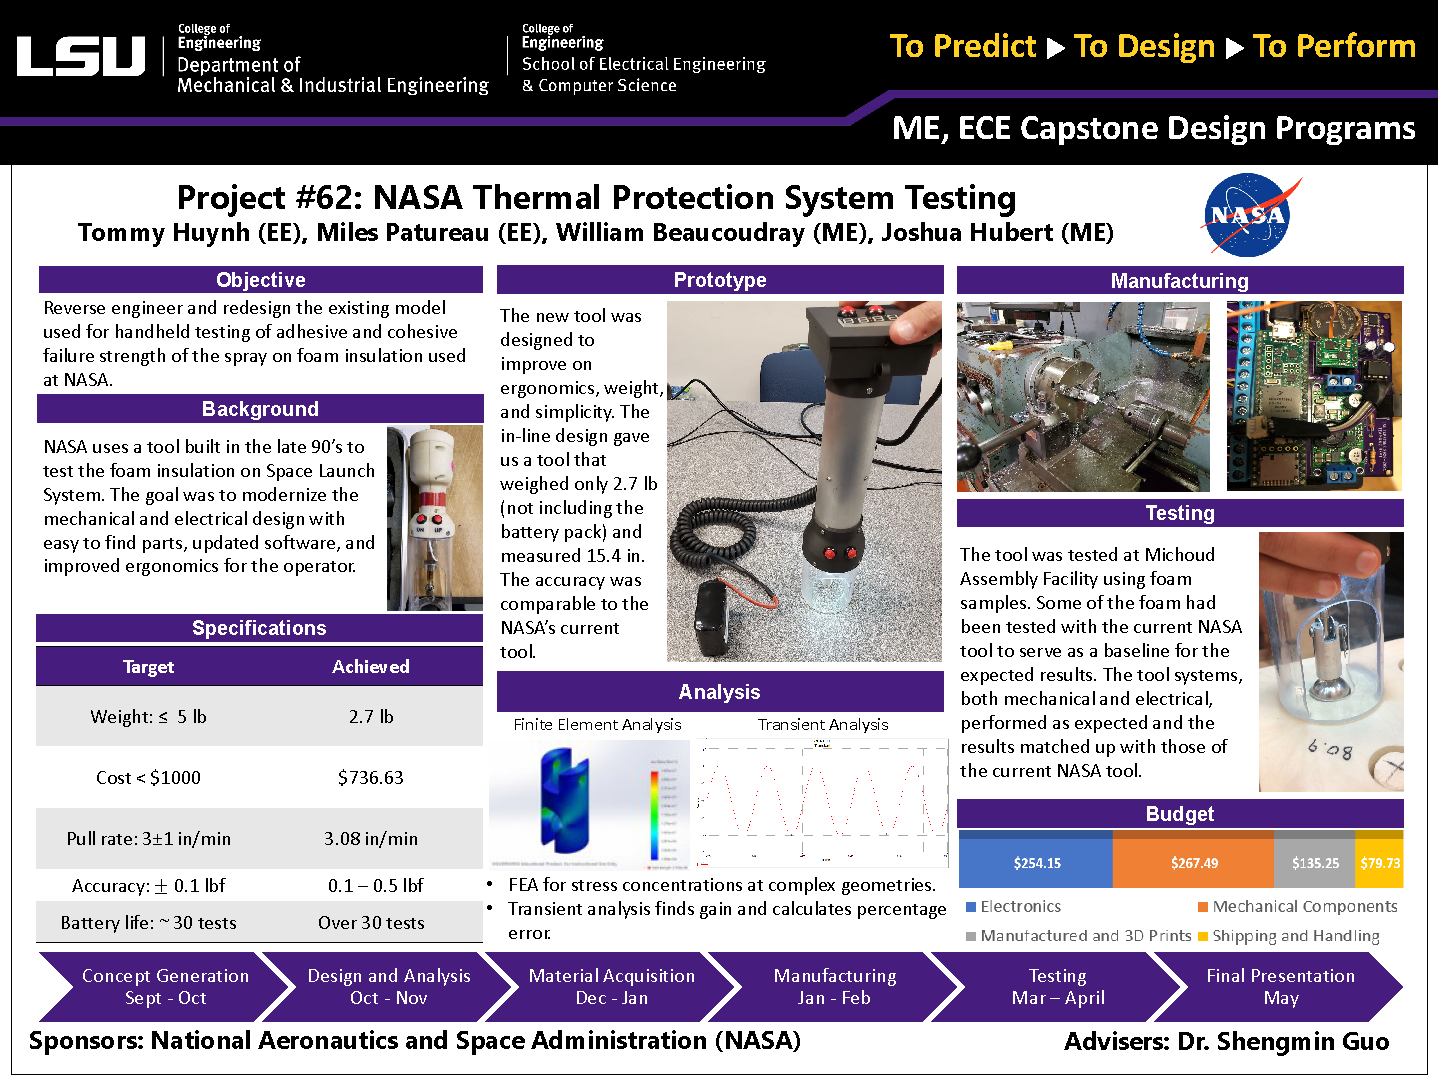 Project 62: Thermal Protection System Testing (2021)